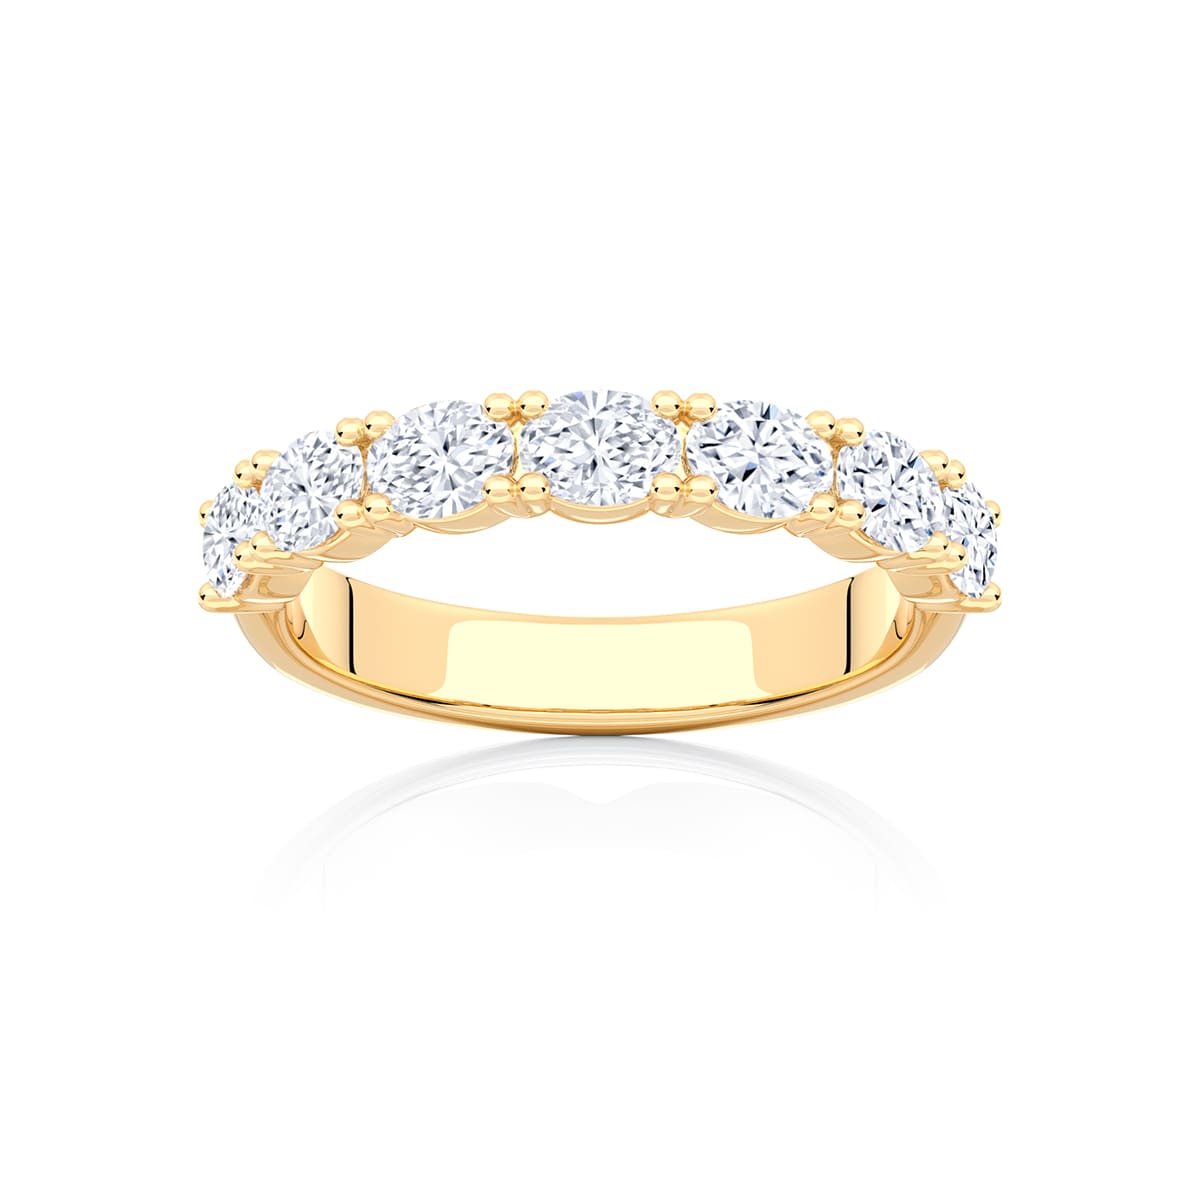 Parabola Oval Lab Grown Diamond Wedding Ring in Yellow Gold